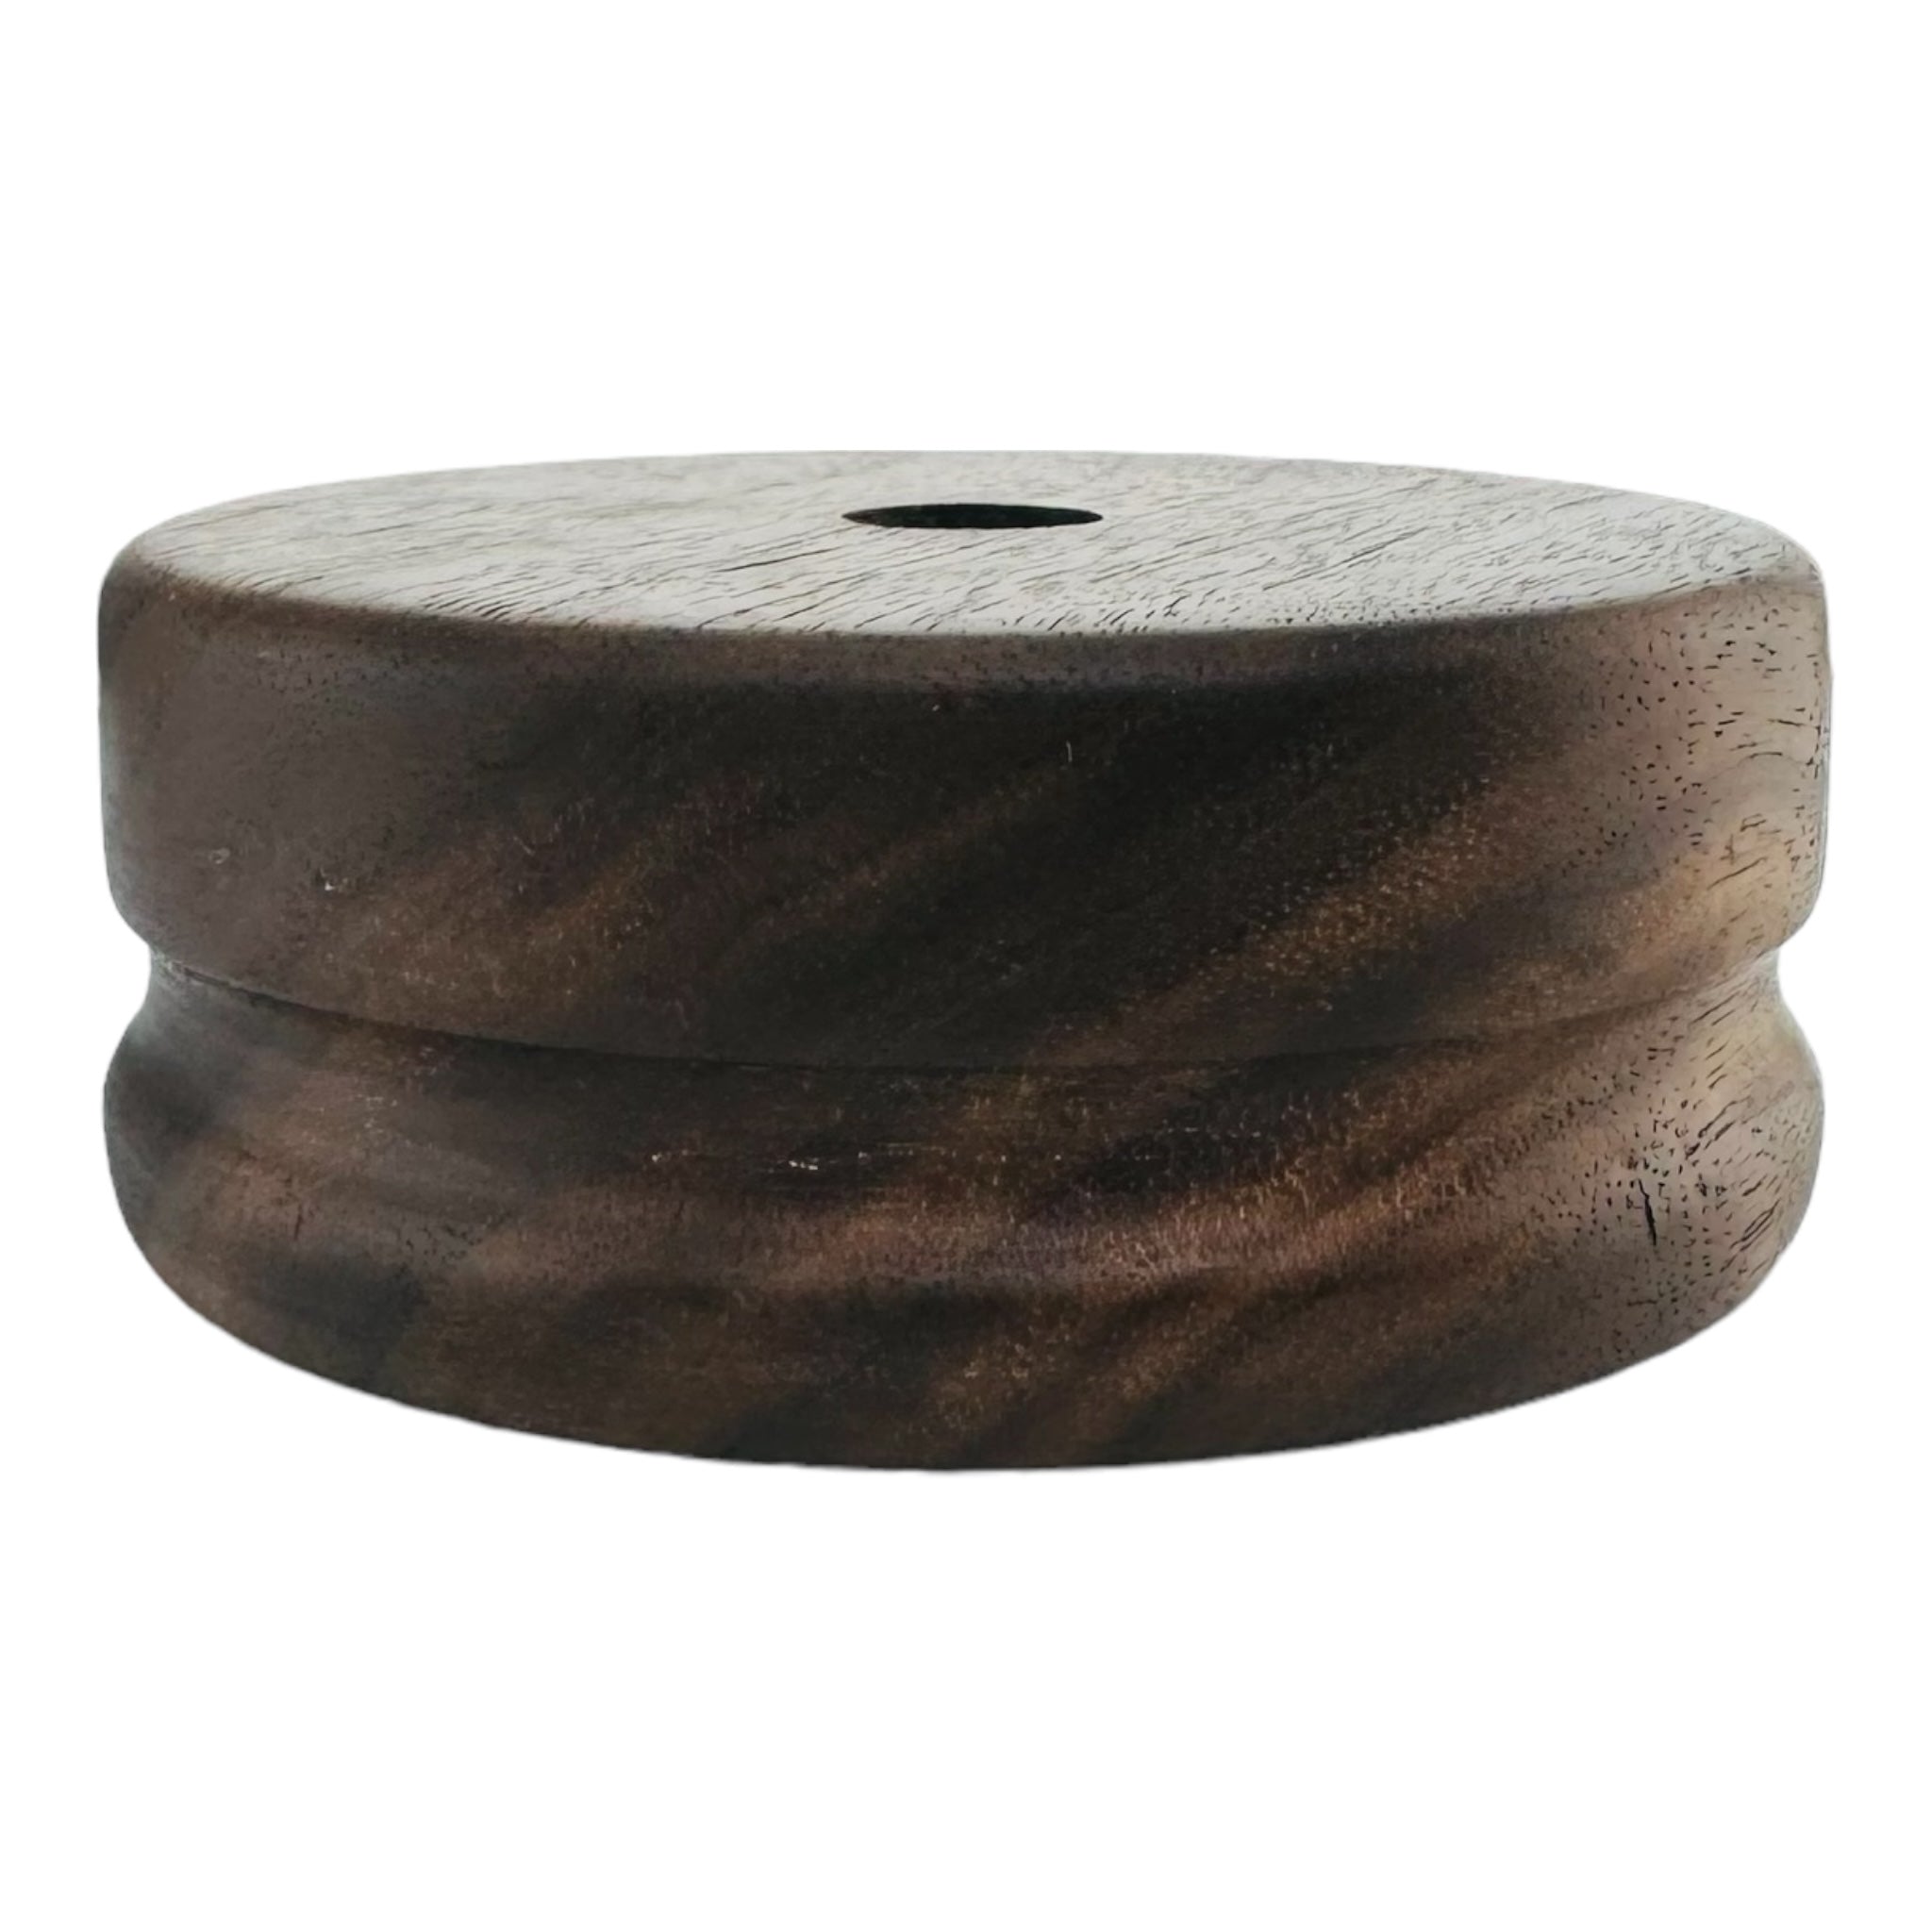 Single Hole Wood Display Stand Holder For 14mm Bong Bowl Pieces Or Quartz Bangers - Black Walnut